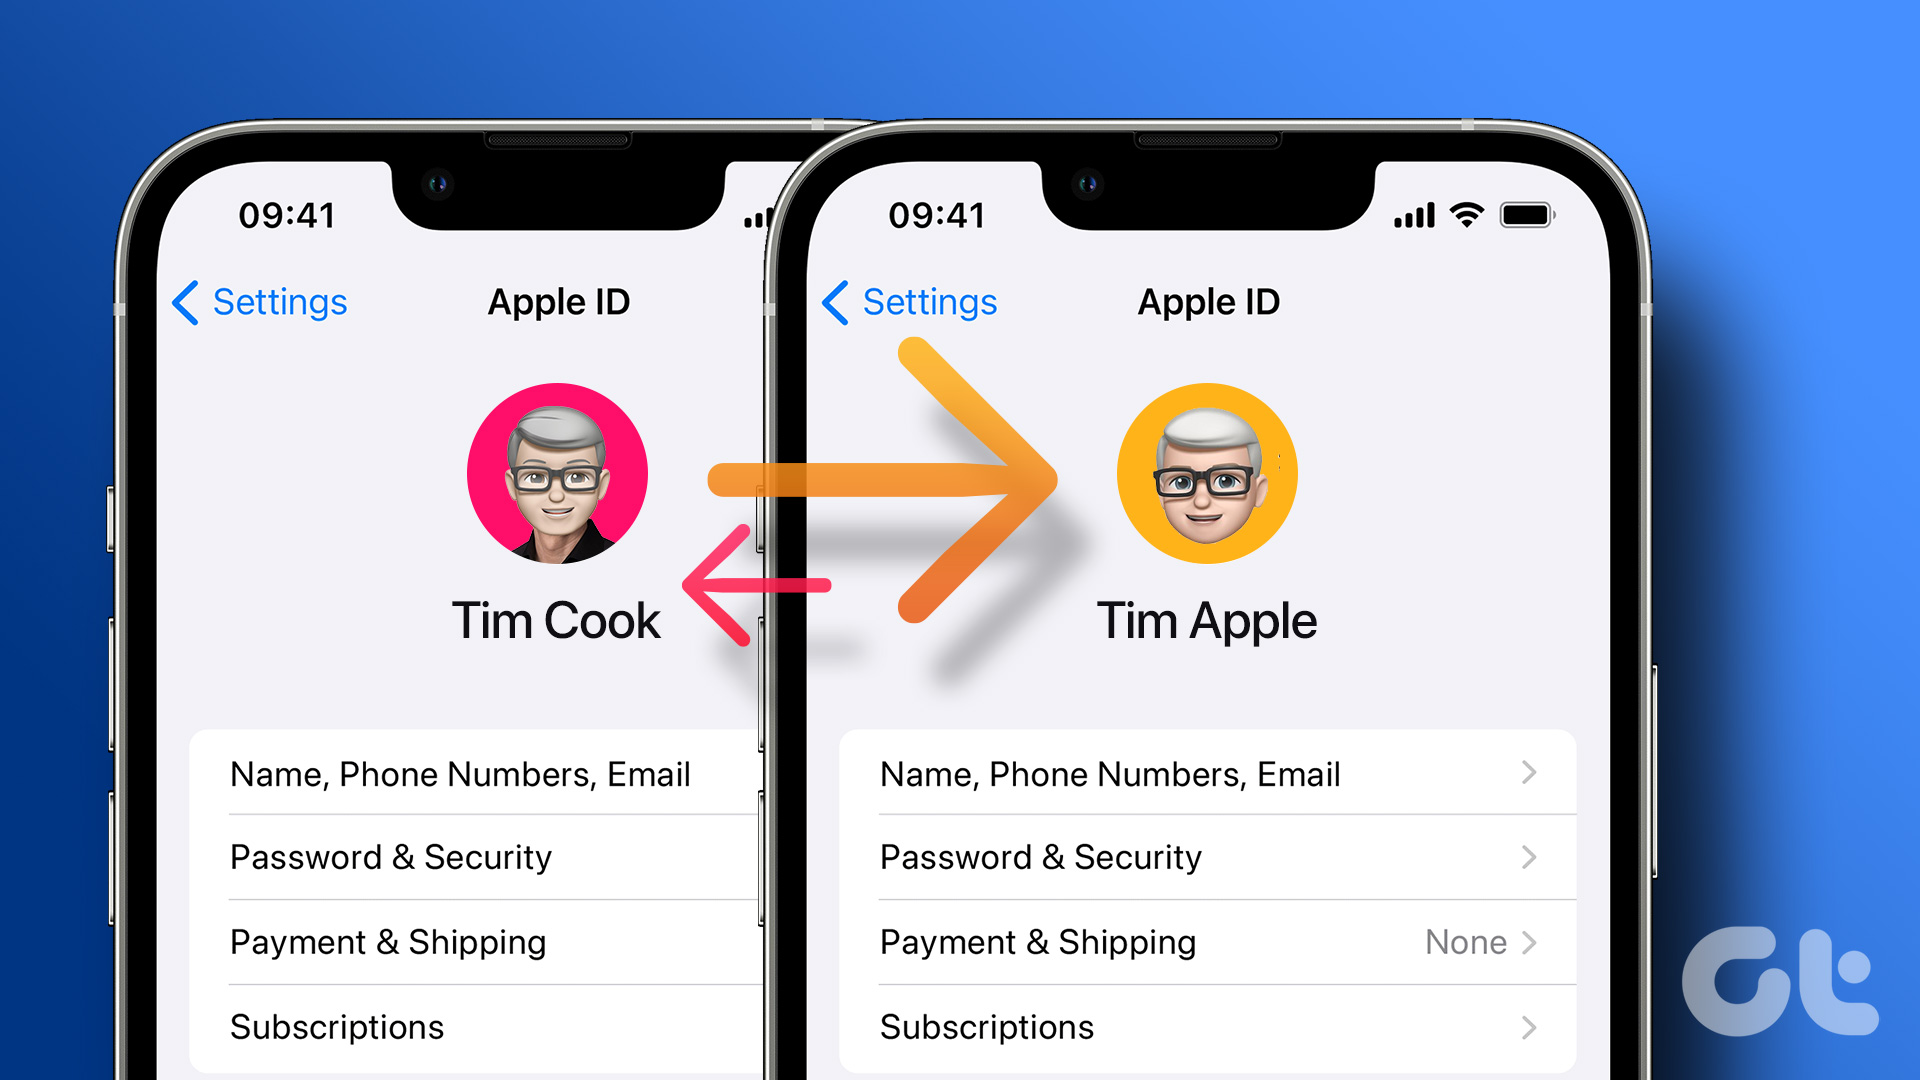 How do I log into two Apple IDs on my iPhone? — The Daily VPN